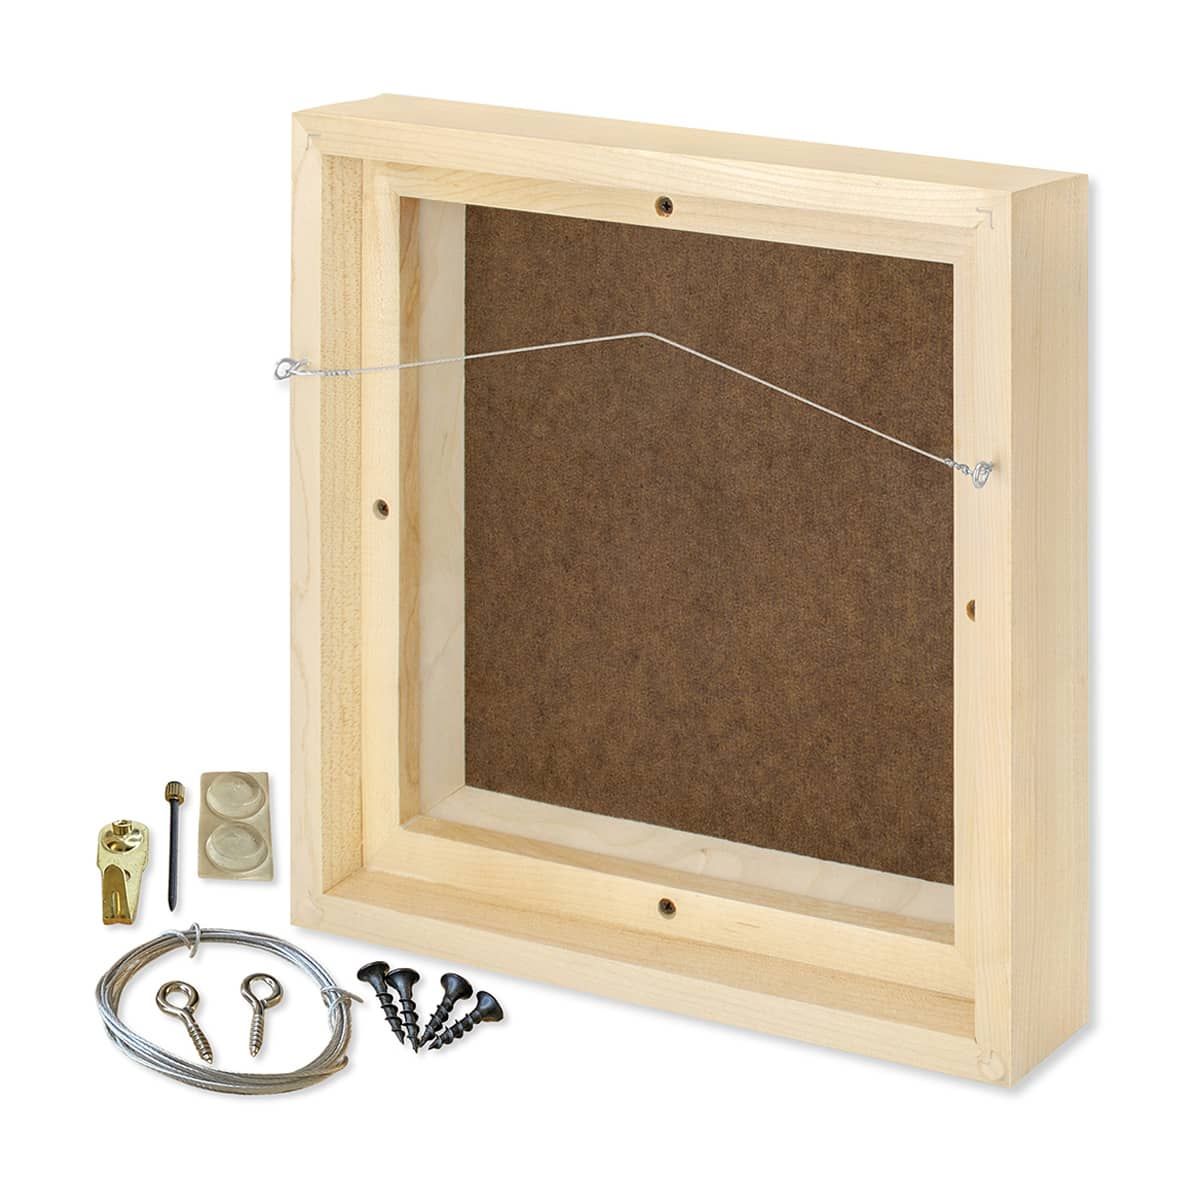 Everything In One Box - All Mounting & Hanging Hardware Included